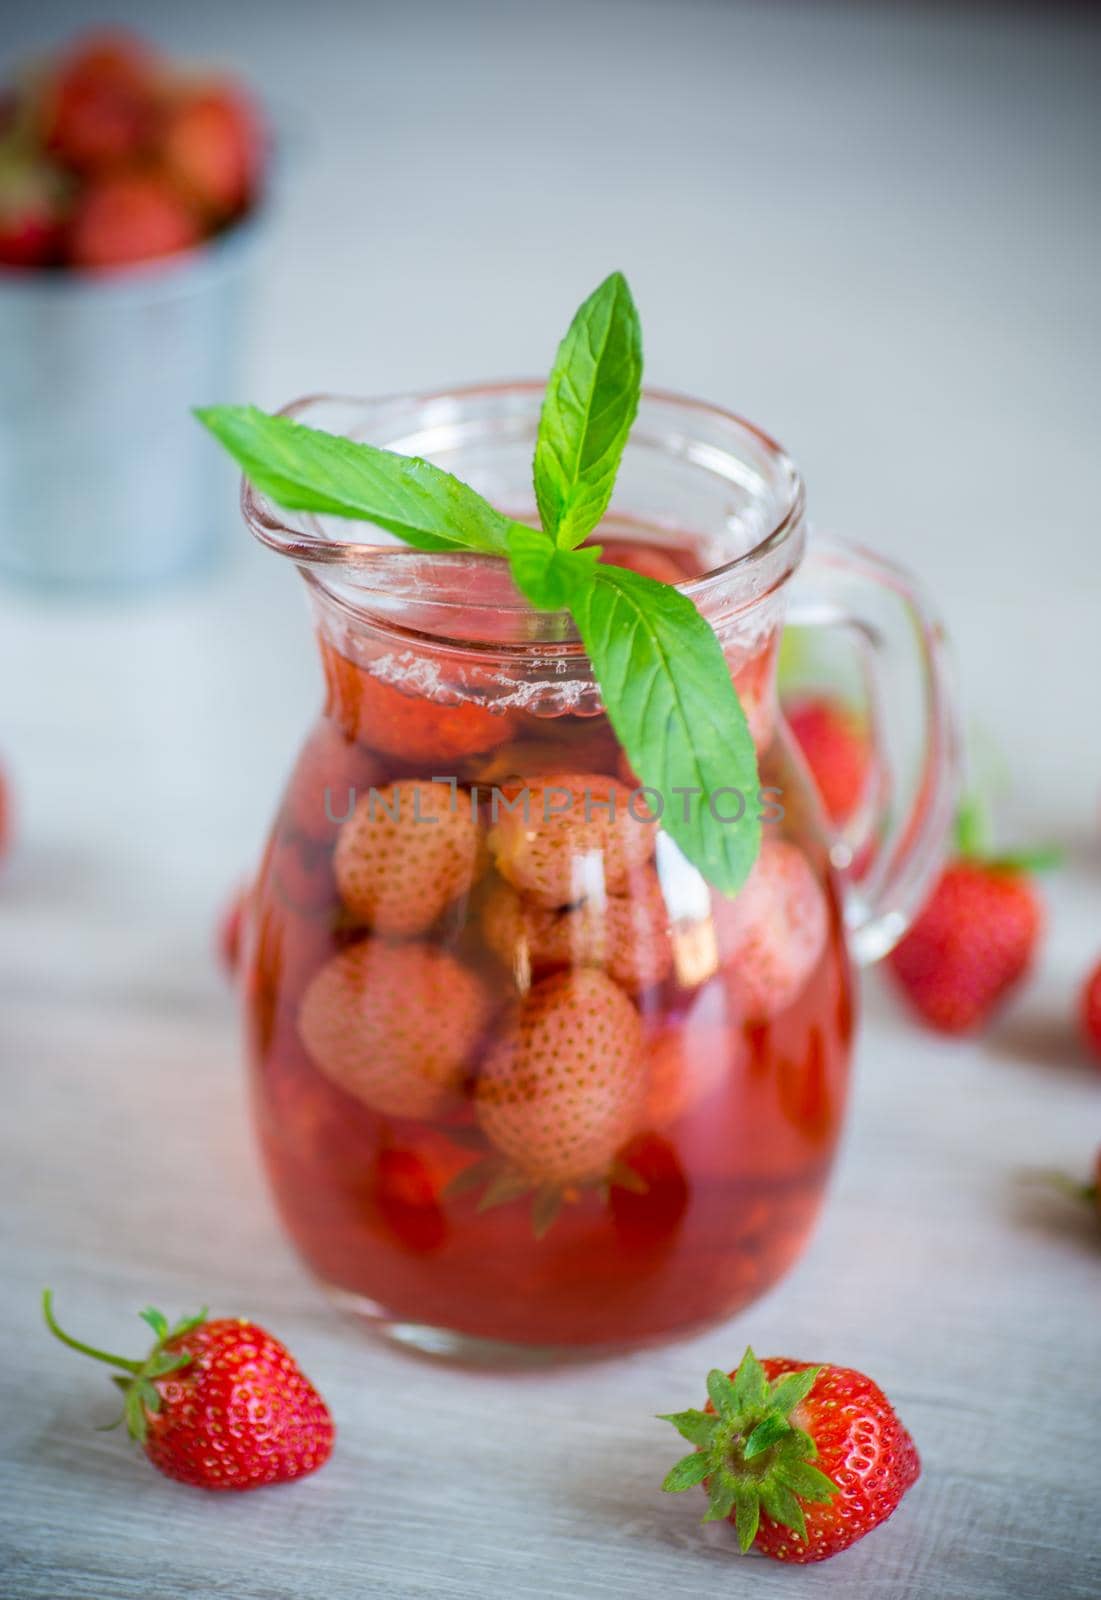 Sweet refreshing berry compote of ripe strawberries in a decanter on a wooden table